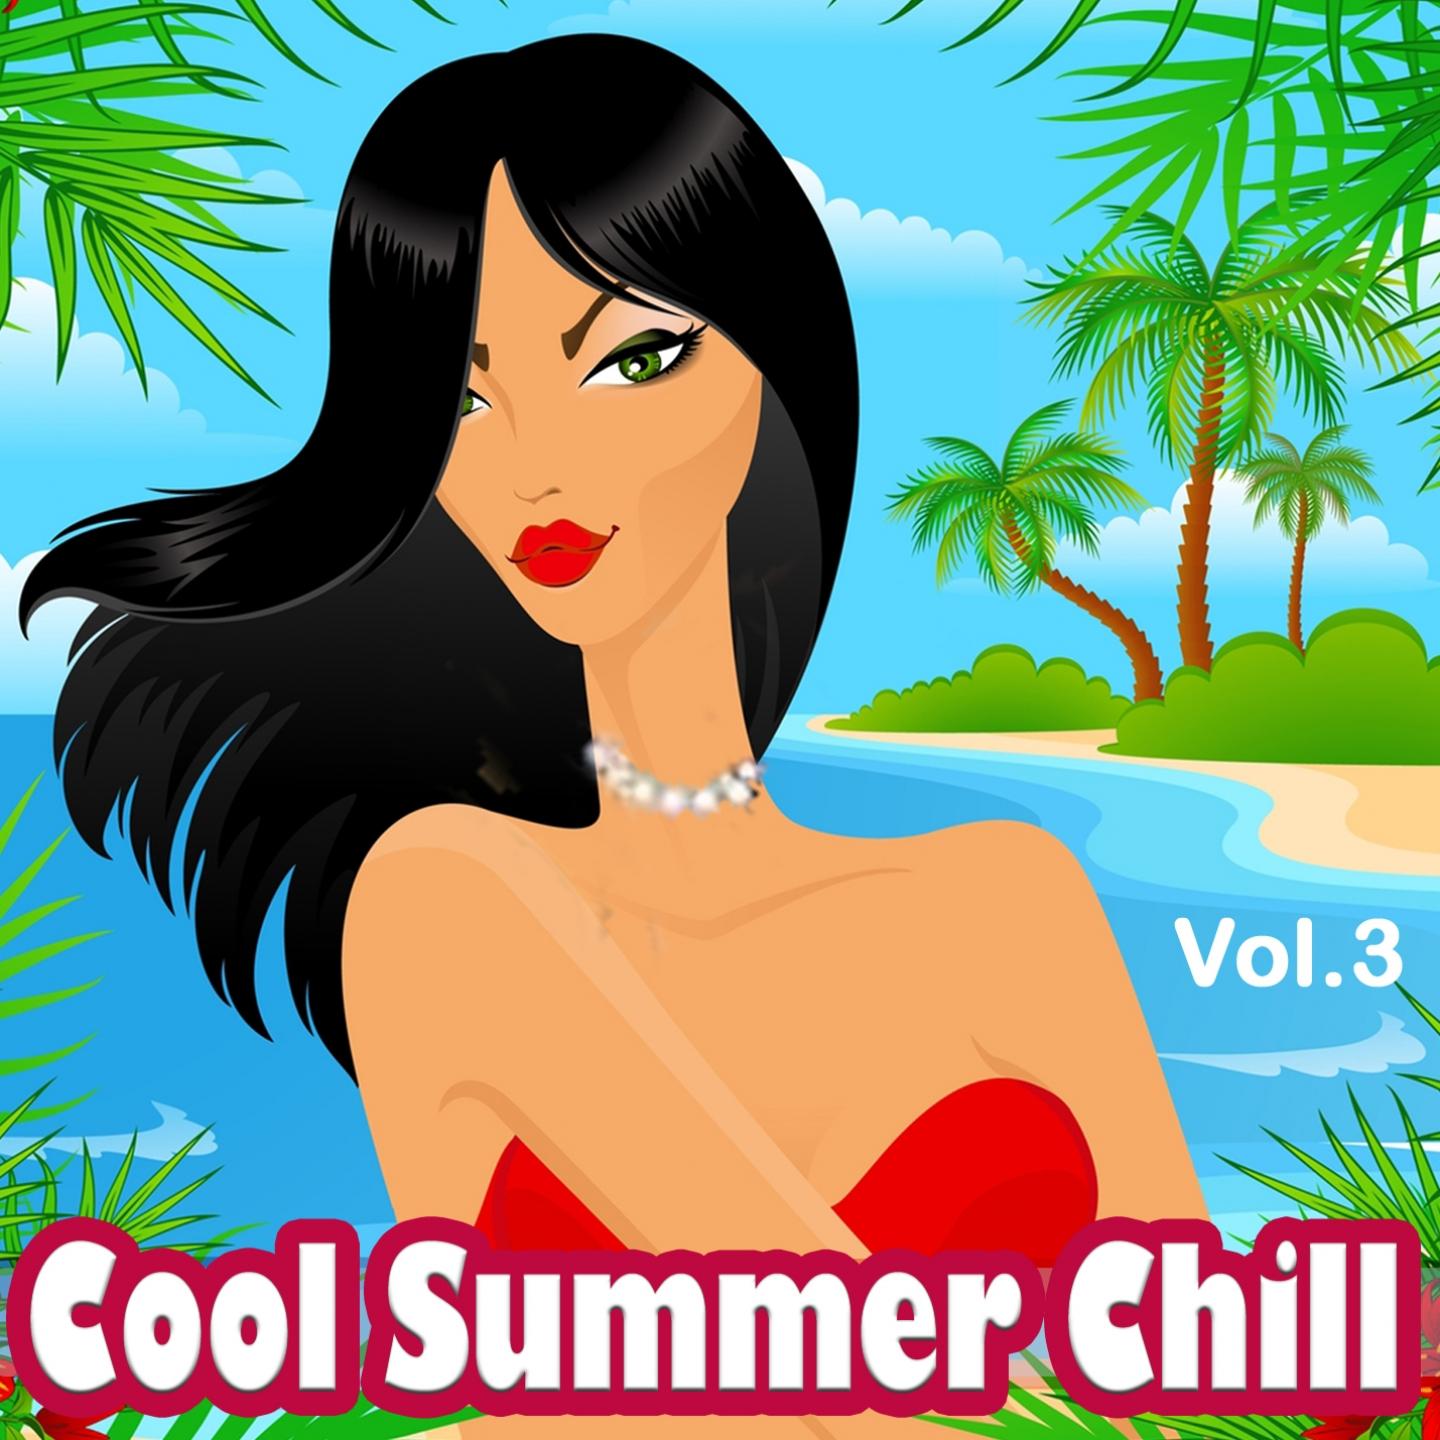 Cool Summer Chill, Vol. 3 (22 Finest Ibiza Sunset Chillout and Lounge Trax)